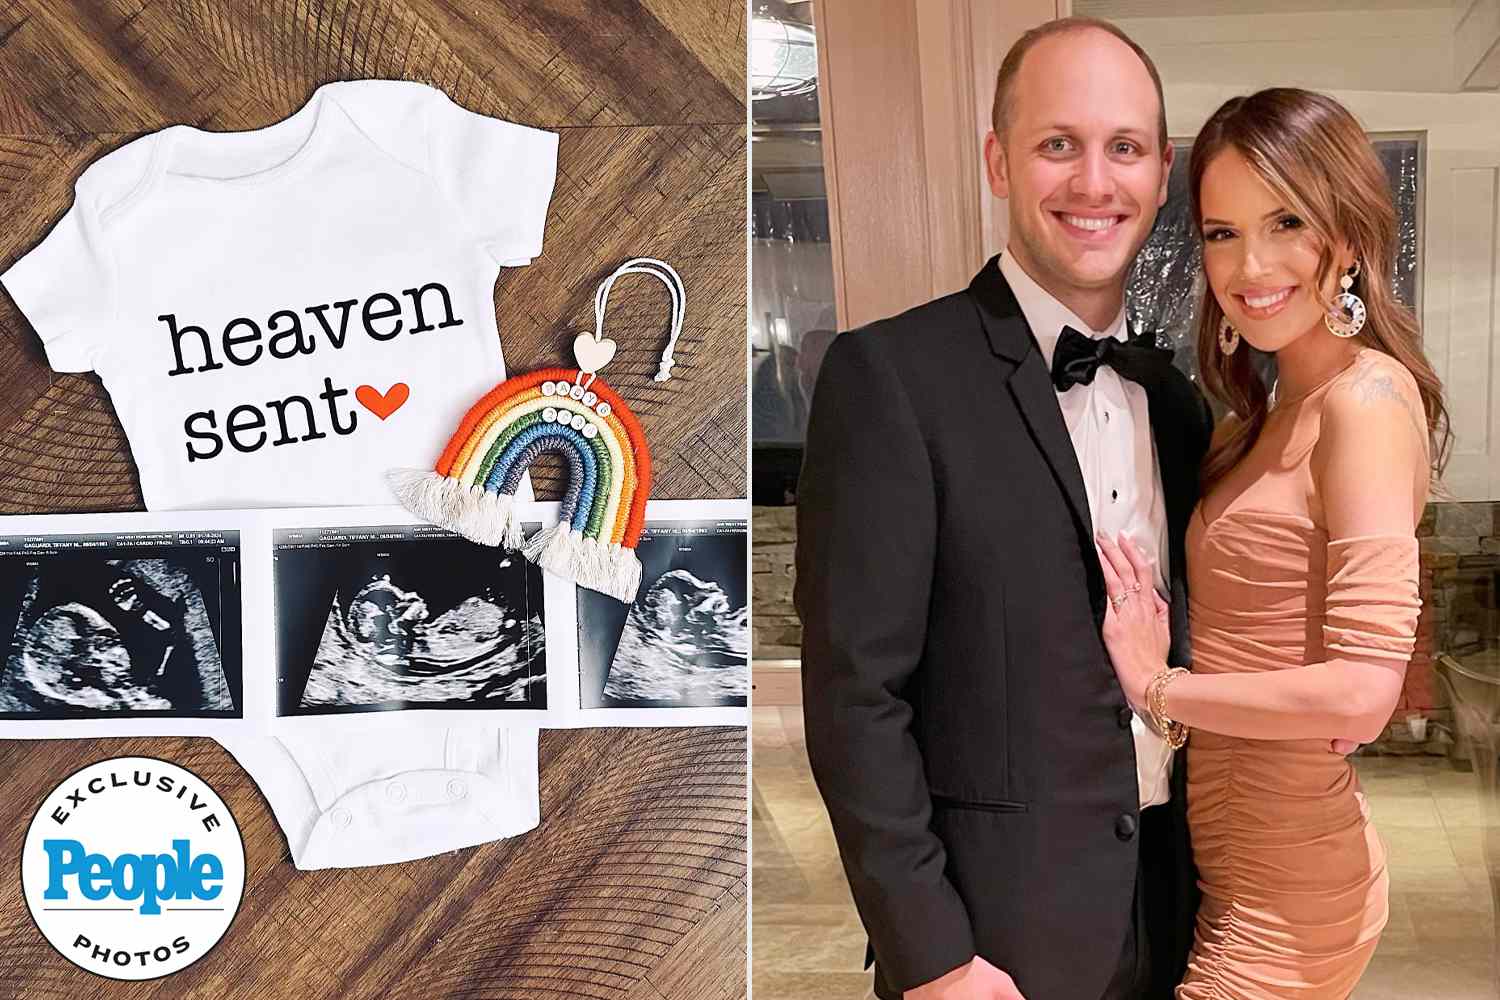 Woman Learns She’s Expecting 'Perfect' Rainbow Baby, Then Finds Out She Has Breast Cancer (Exclusive)